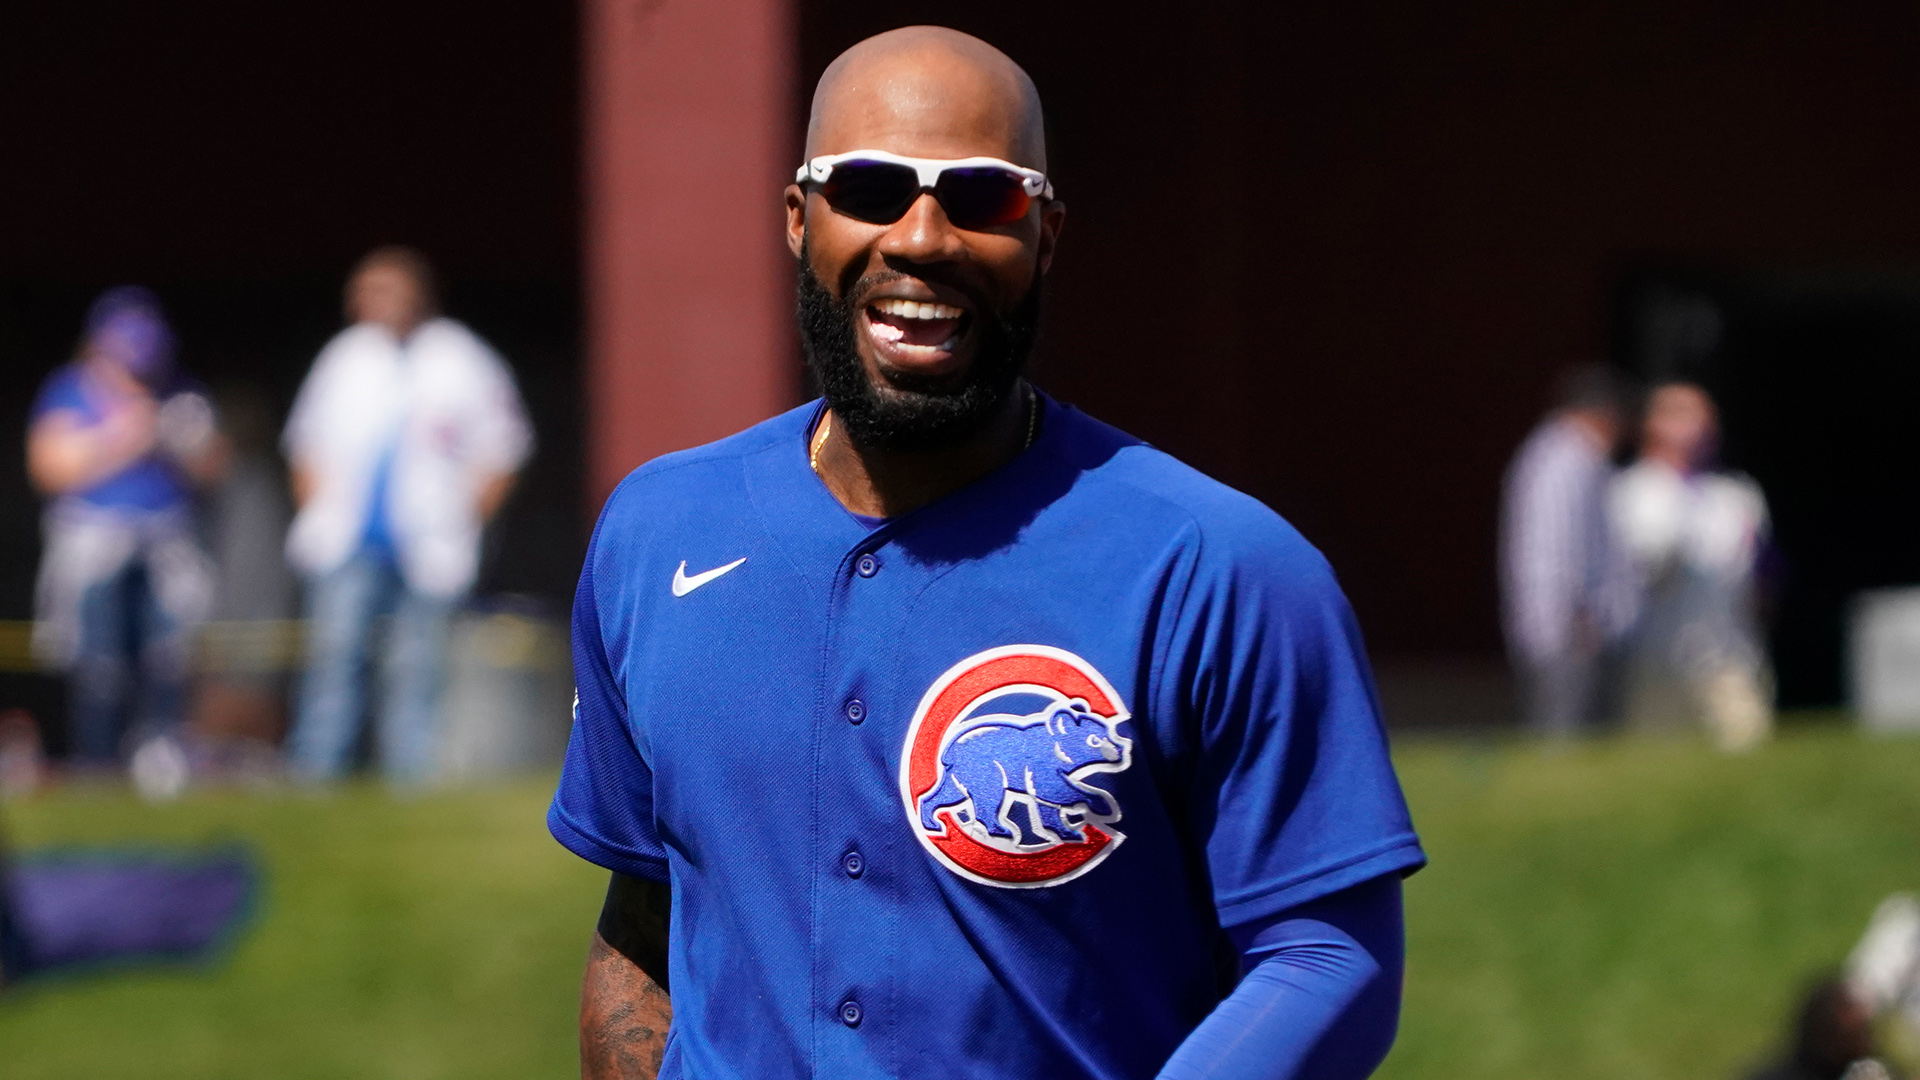 Jason Heyward reflects on time with Cubs and future plans